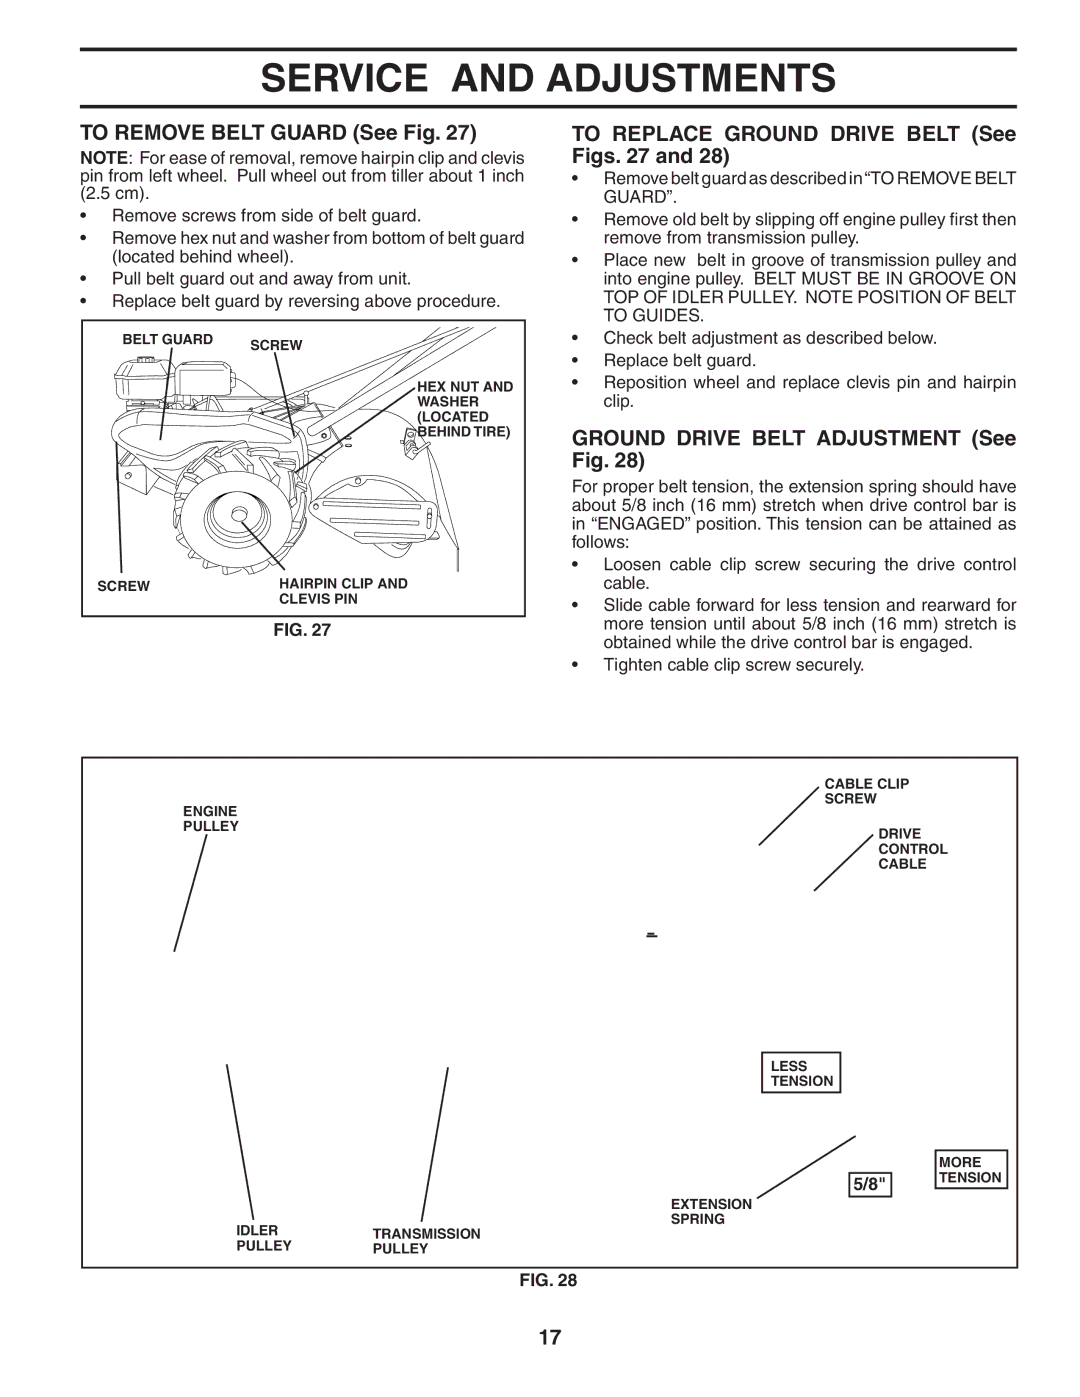 Maxim MXR500 To Remove Belt Guard See Fig, To Replace Ground Drive Belt See Figs, Ground Drive Belt Adjustment See Fig 